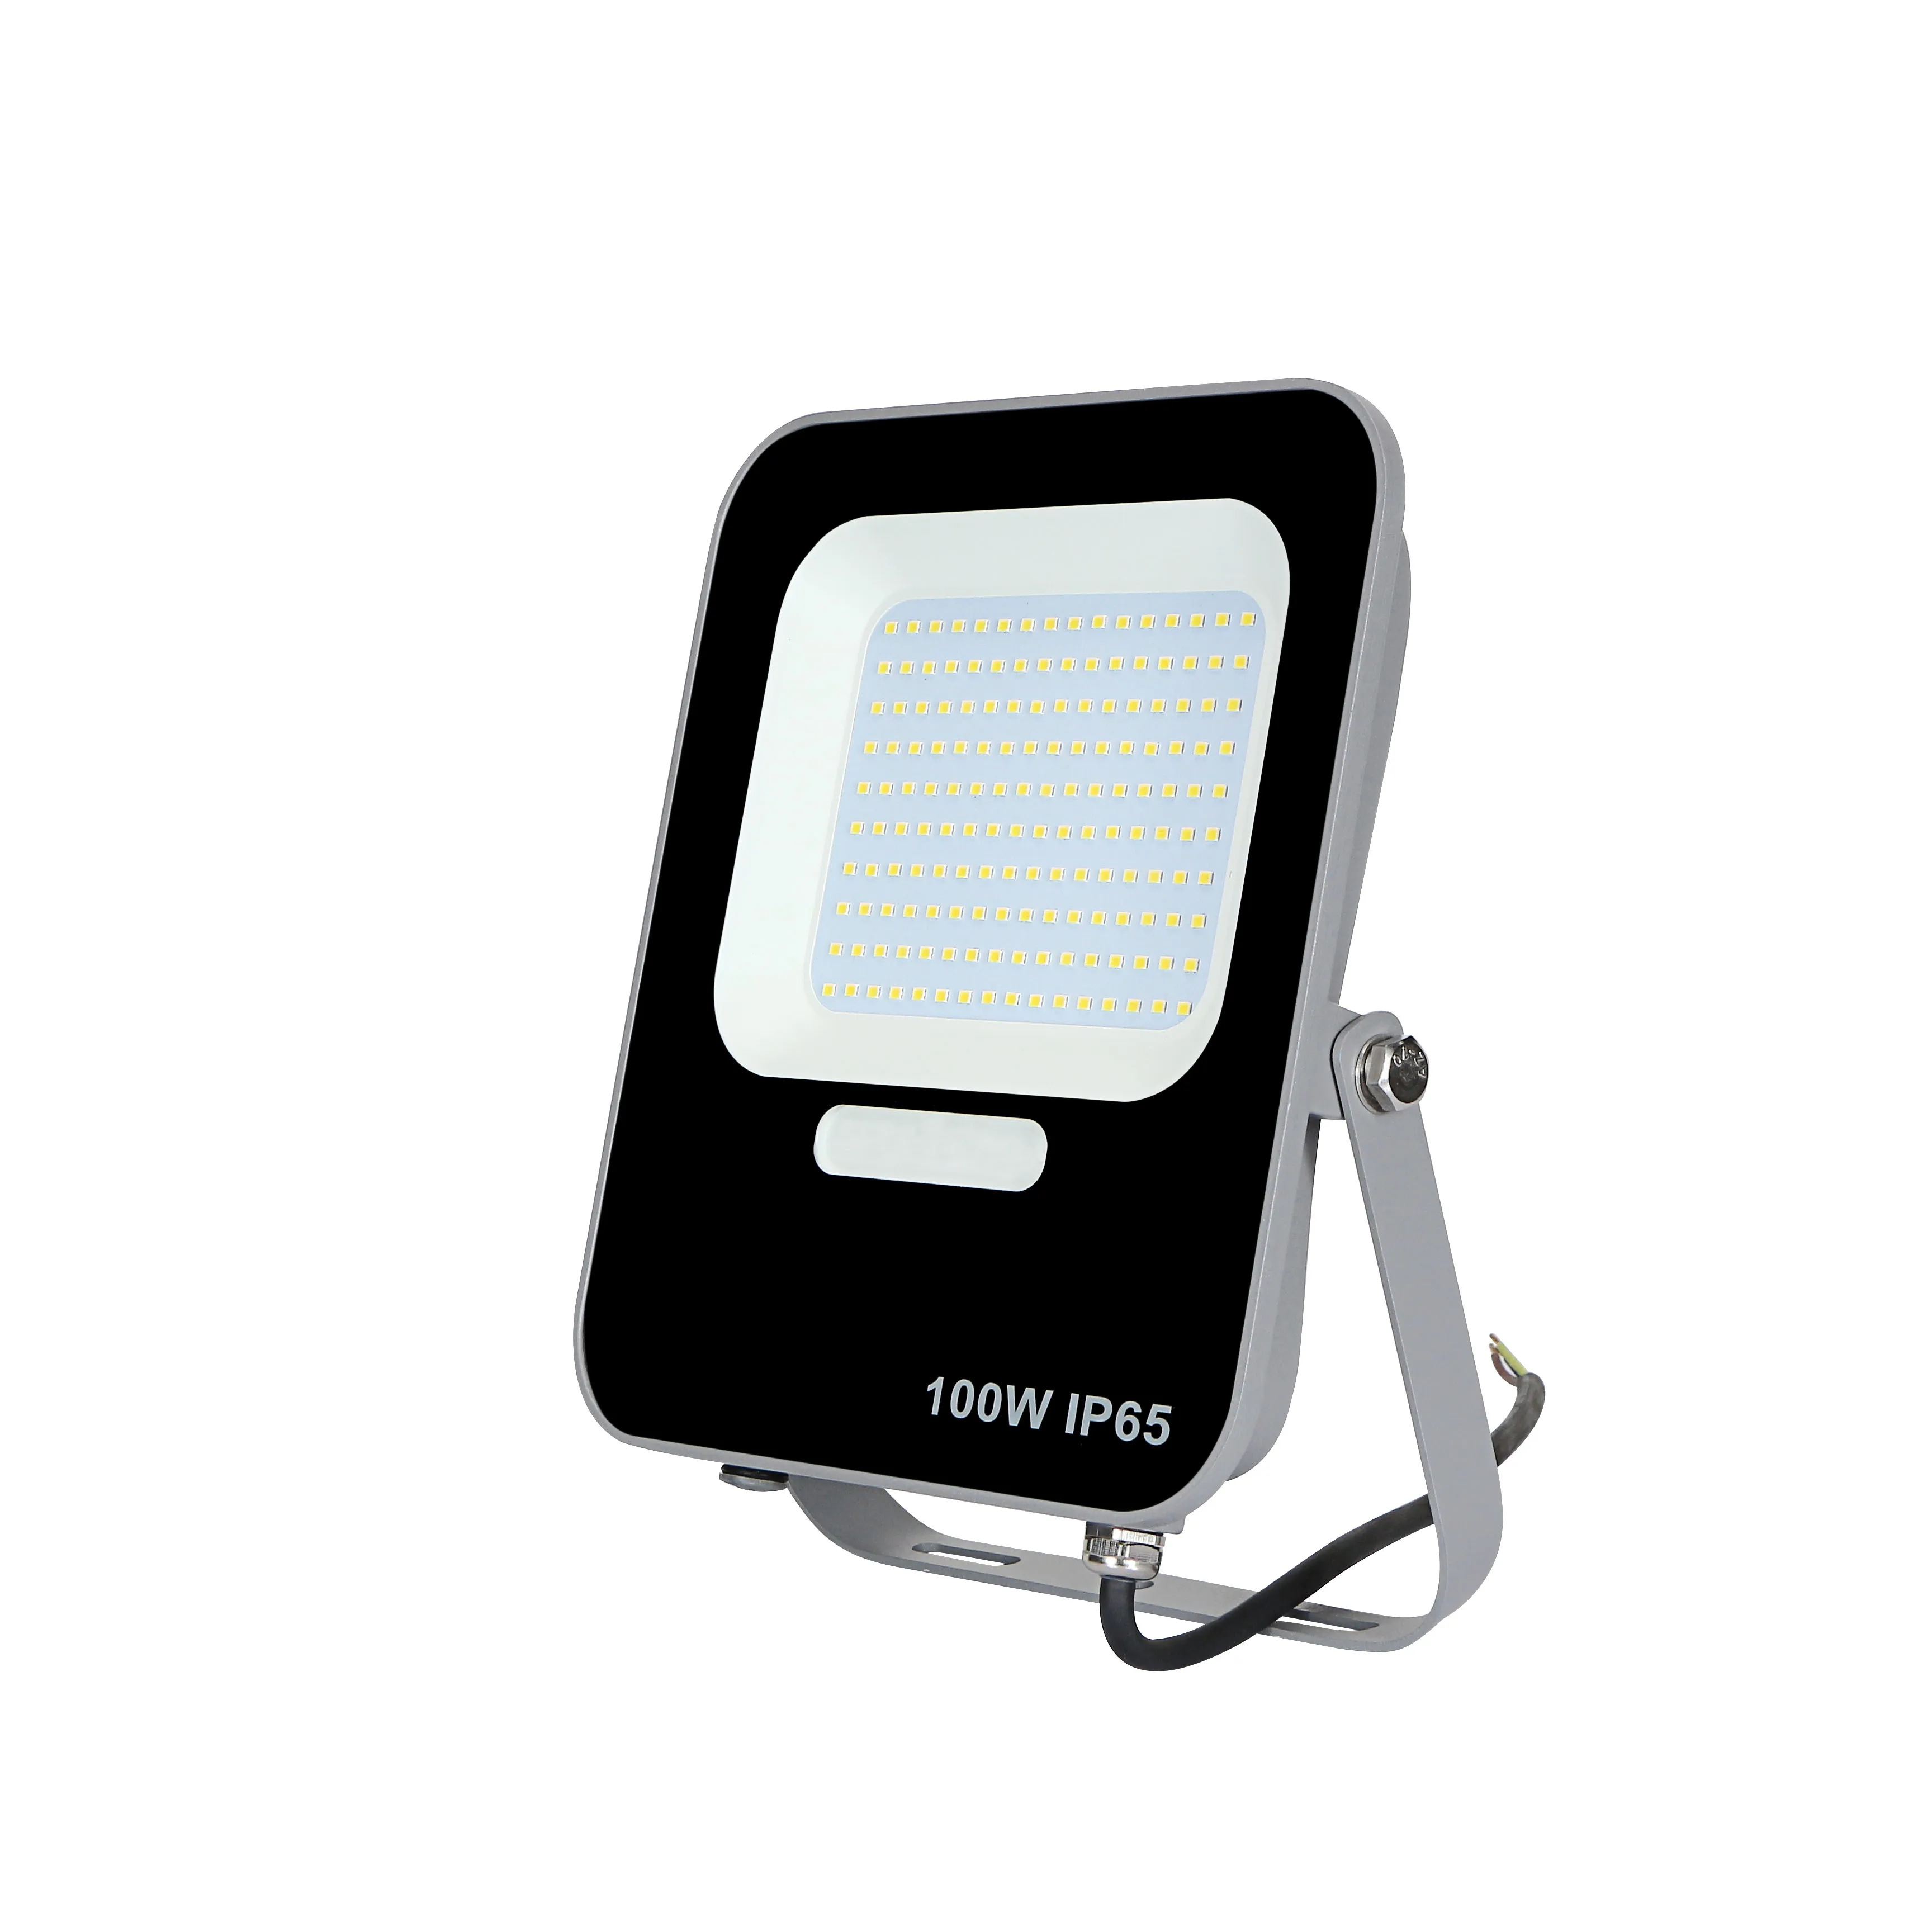 100W Outdoor LED Flood Light, Super Bright Outdoor Work Light, IP65 Waterproof, 10000LM, Super Bright Security Lights